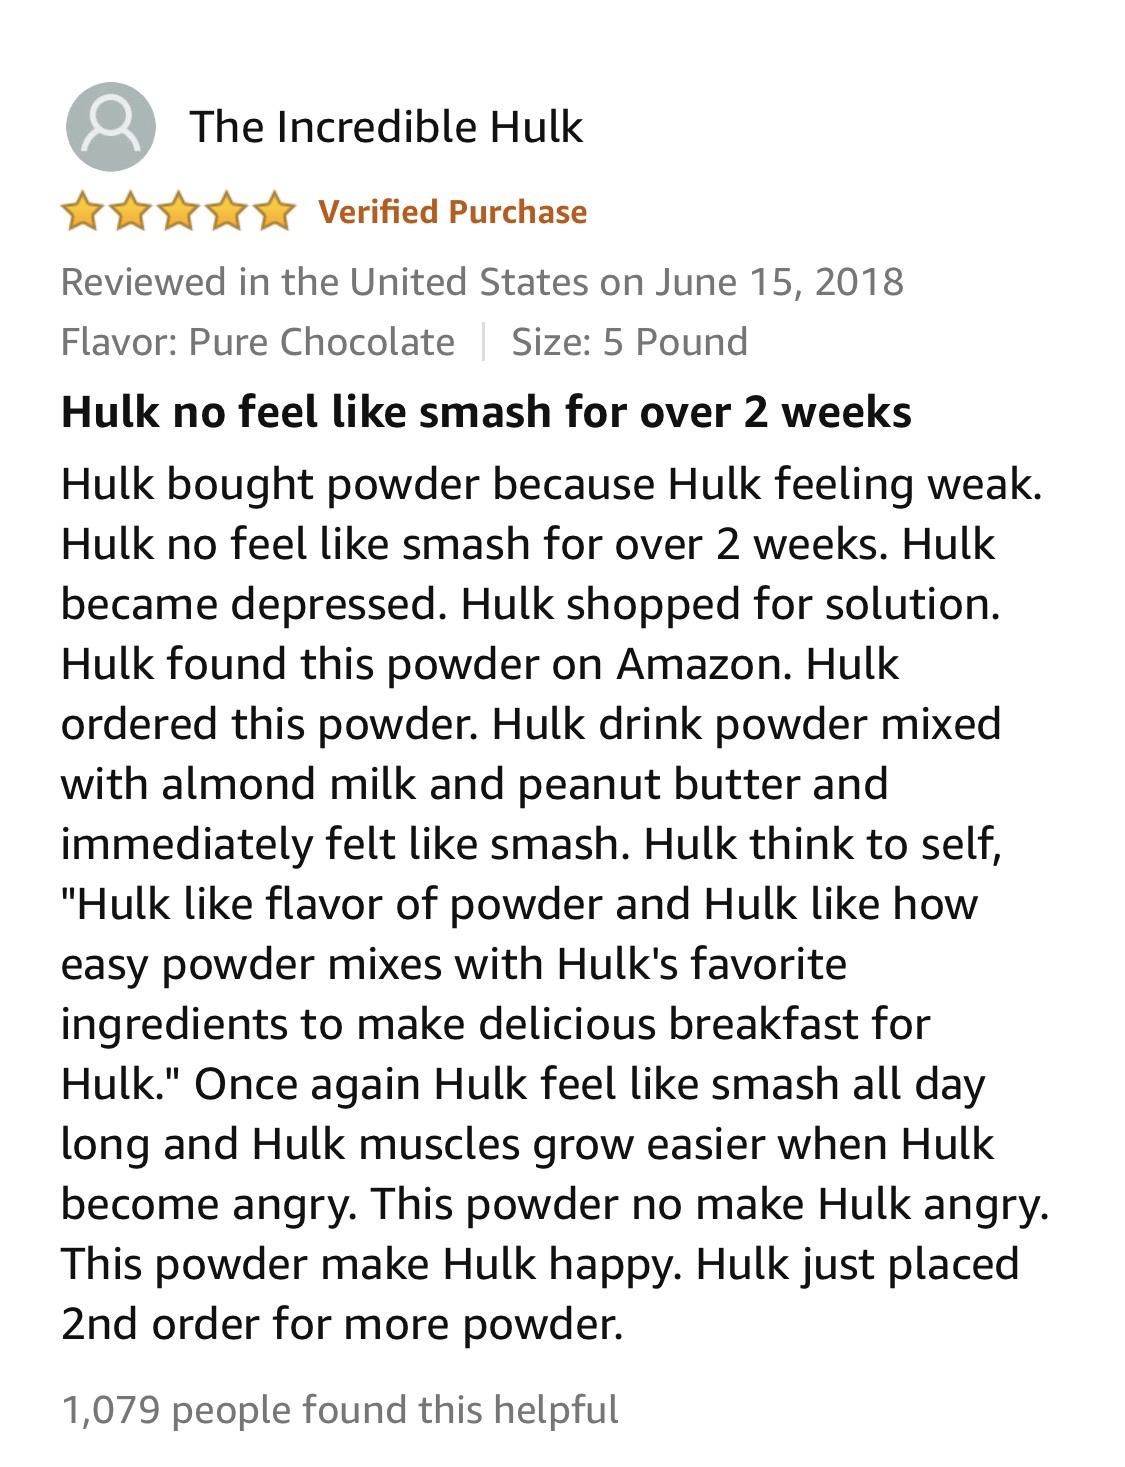 The Incredible Hulk left a review on the protein powder I bought